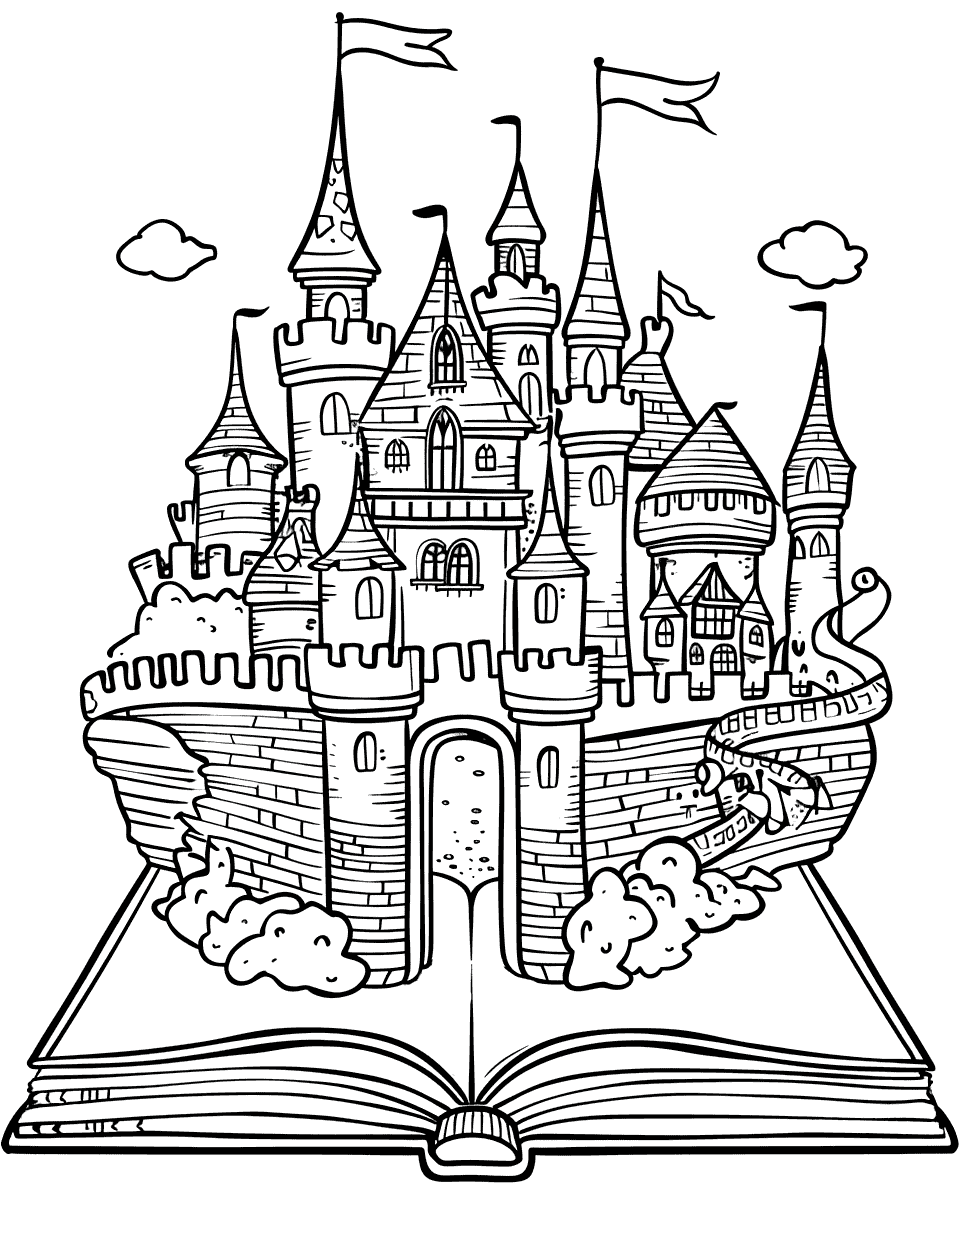 Fairy Tale Book and Castle Coloring Page - An open storybook with a fairy tale castle emerging from the pages.